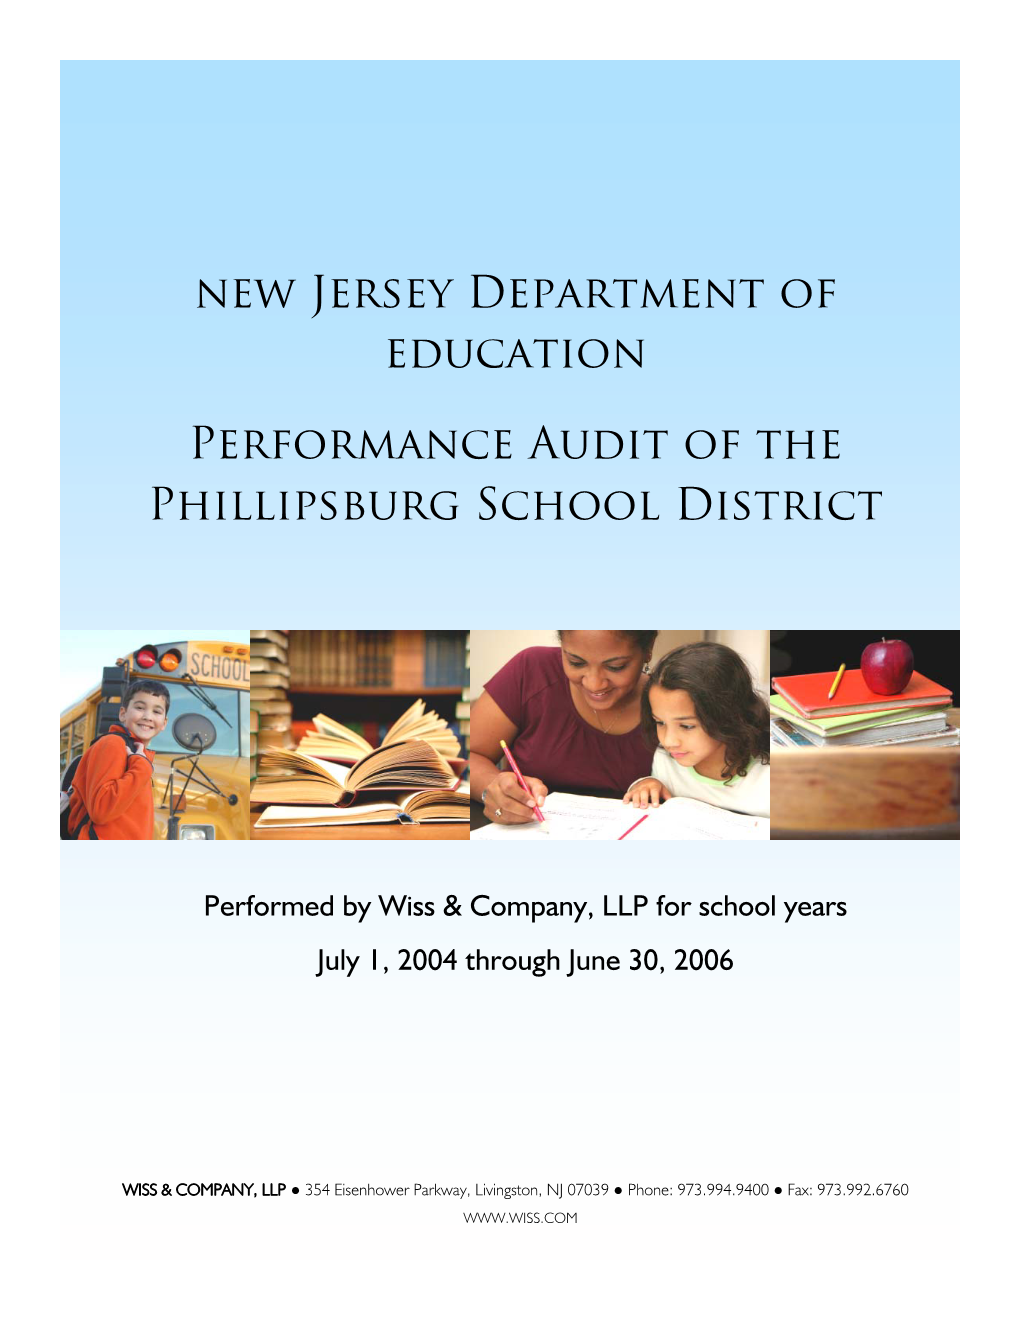 New Jersey Department of Education Performance Audit of The